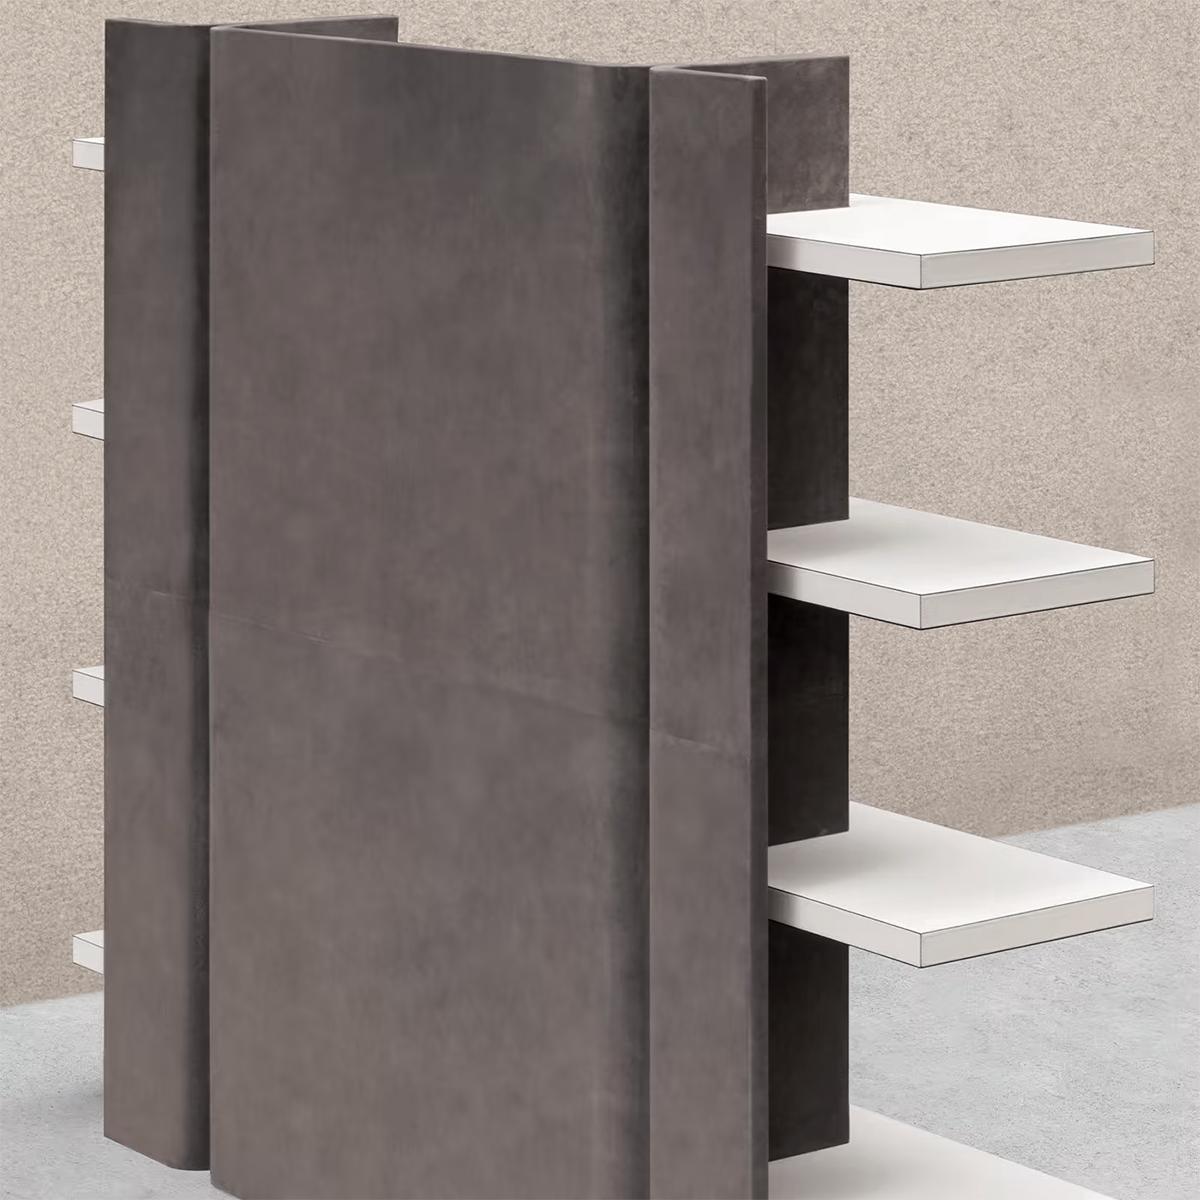 Bookshelf Romy leather with wood structure, with all structure 
covered with grey suede leather and with 4 shelves covered with
white grained calfskin leather.